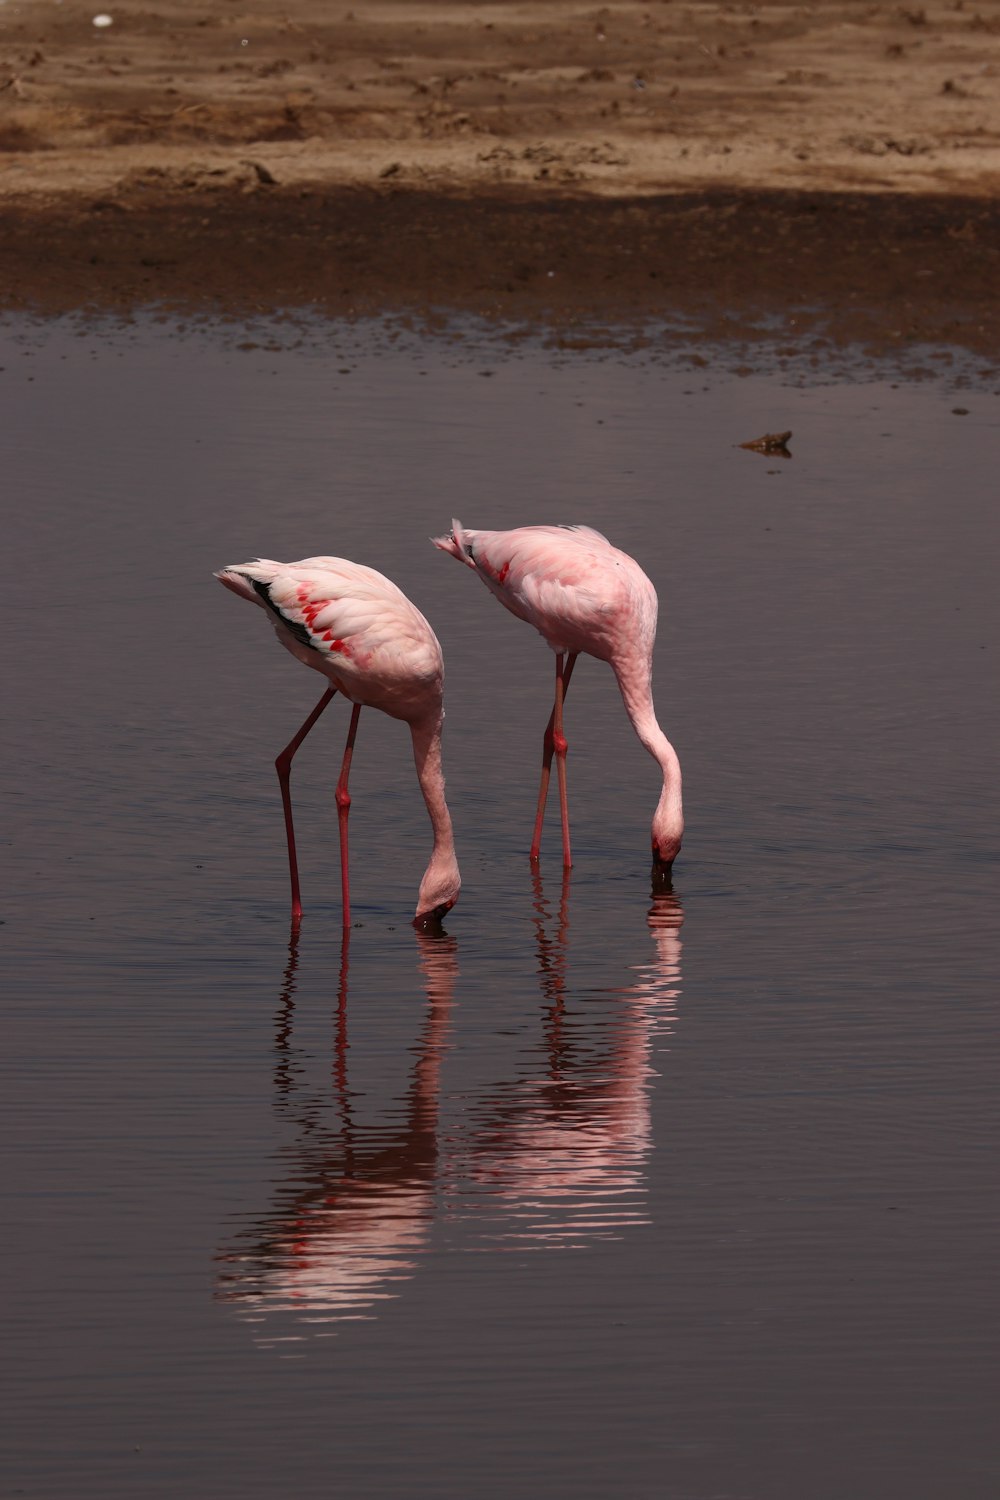 two flamingos are standing in the shallow water